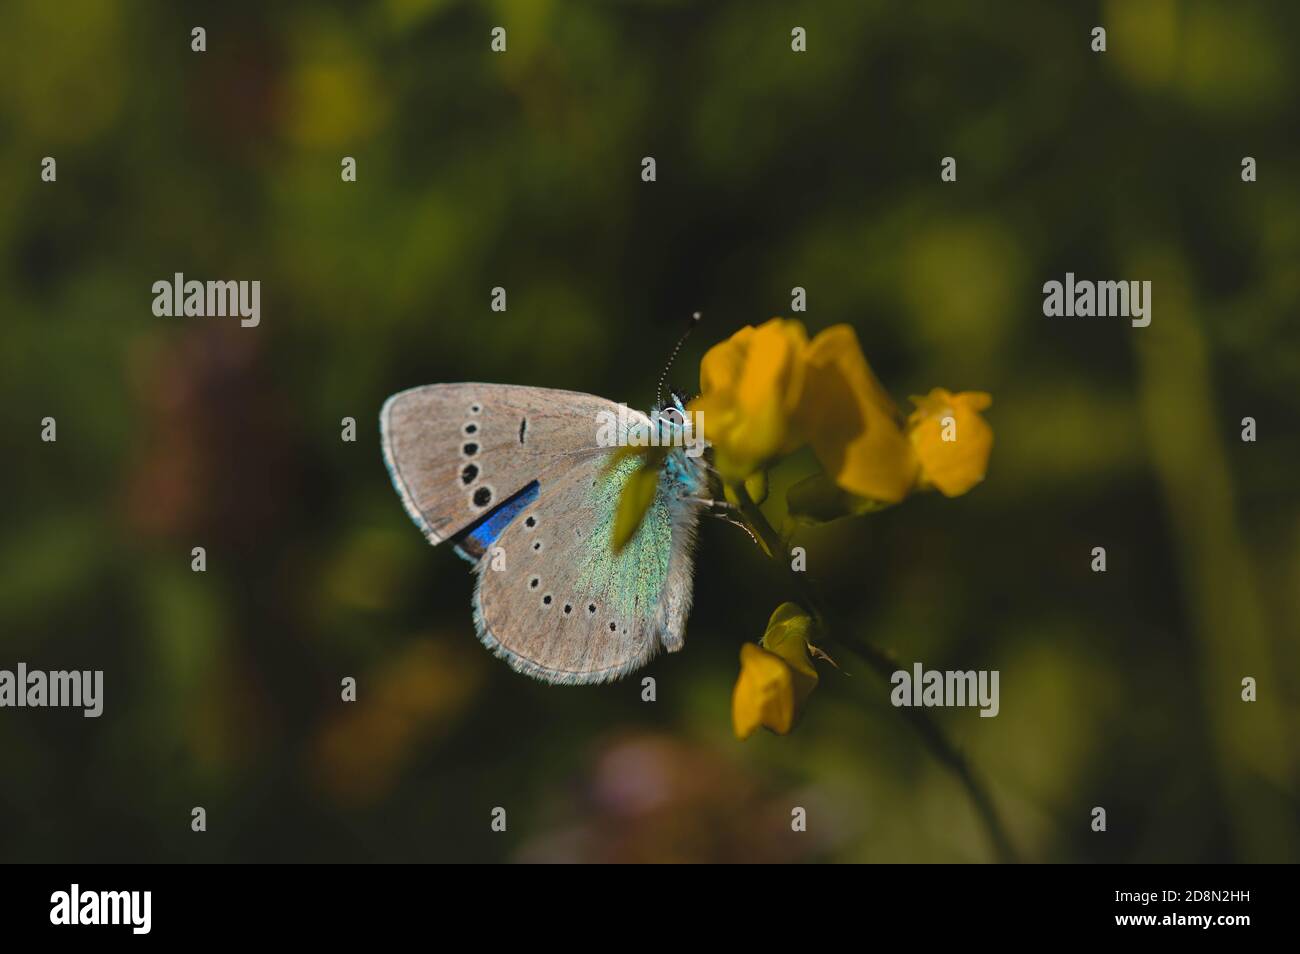 Small gray and blue butterfly on a yellow flower in the wild, horizontal background. Stock Photo